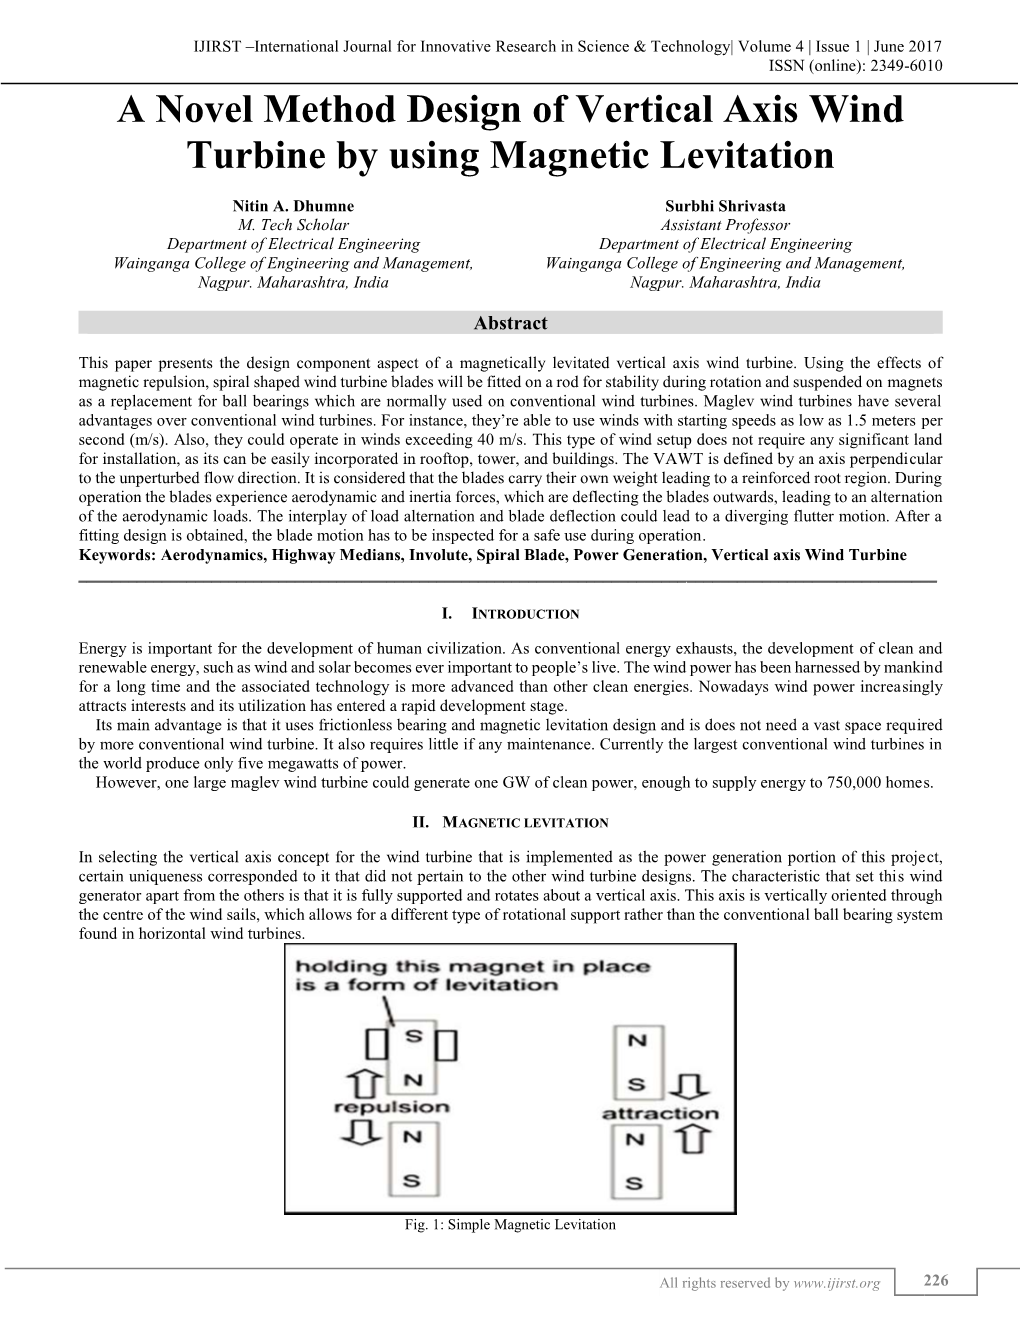 A Novel Method Design of Vertical Axis Wind Turbine by Using Magnetic Levitation (IJIRST/ Volume 4 / Issue 1/ 038)